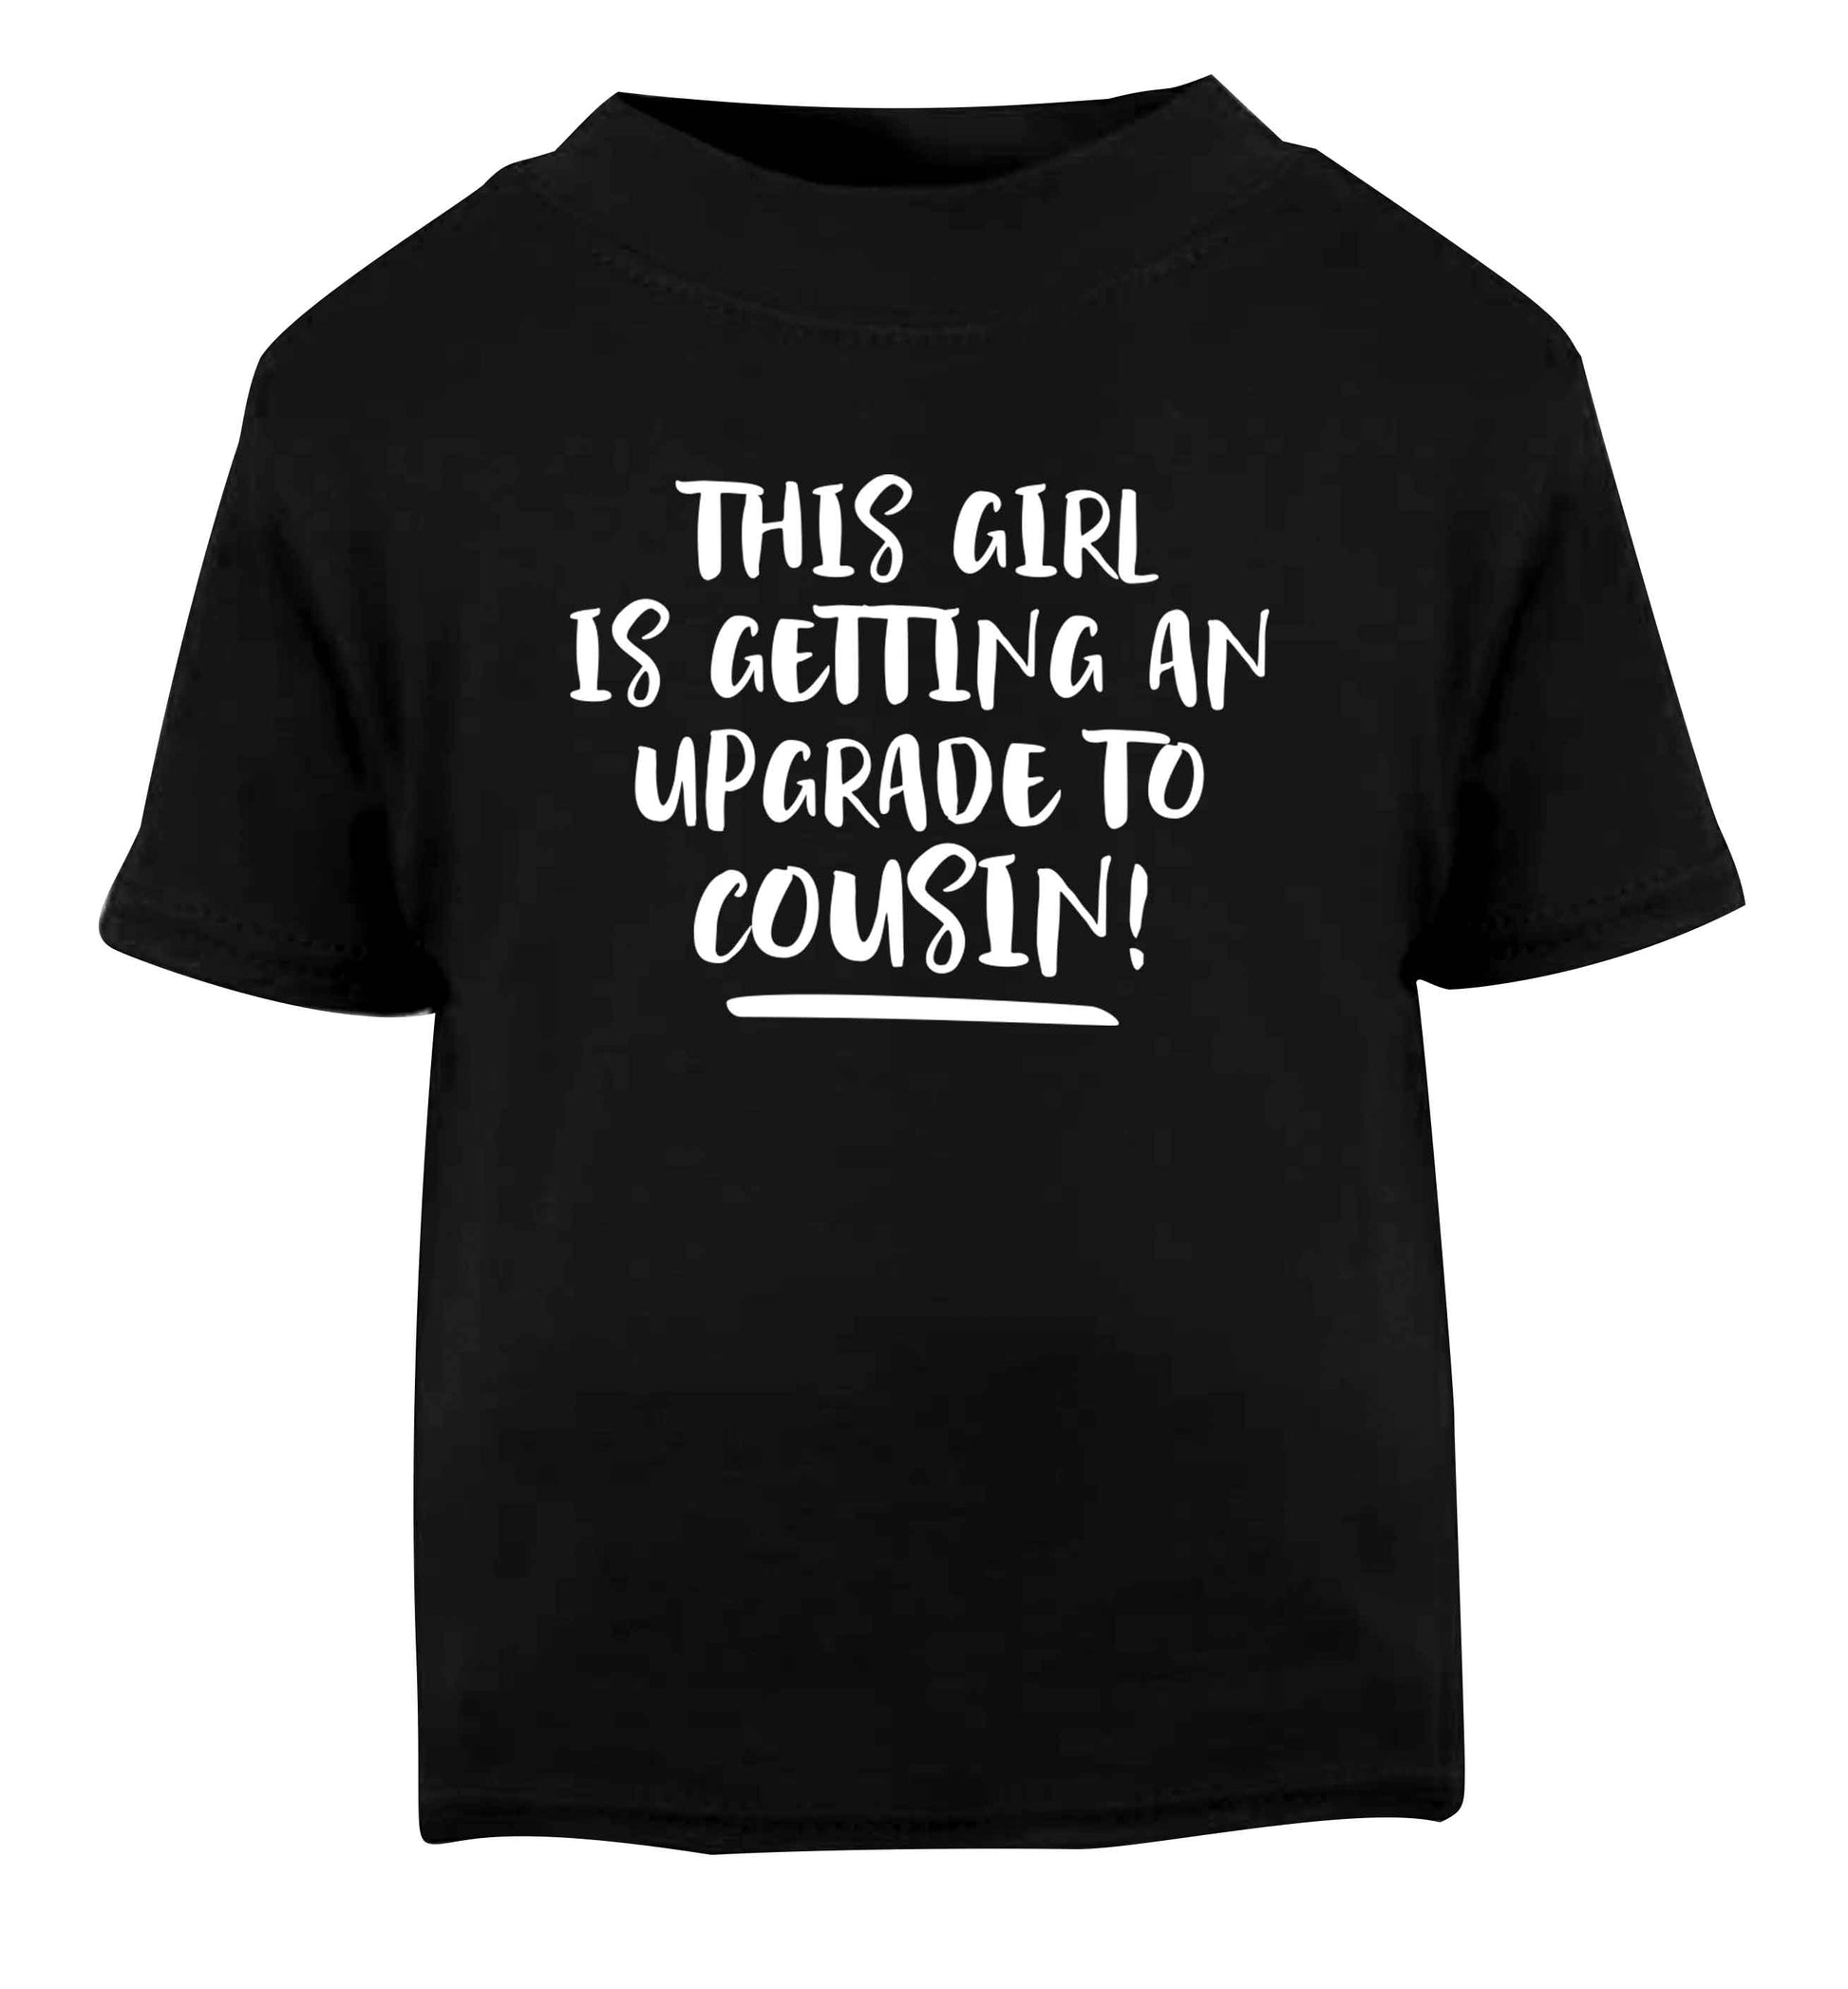 This girl is getting an upgrade to cousin! Black Baby Toddler Tshirt 2 years